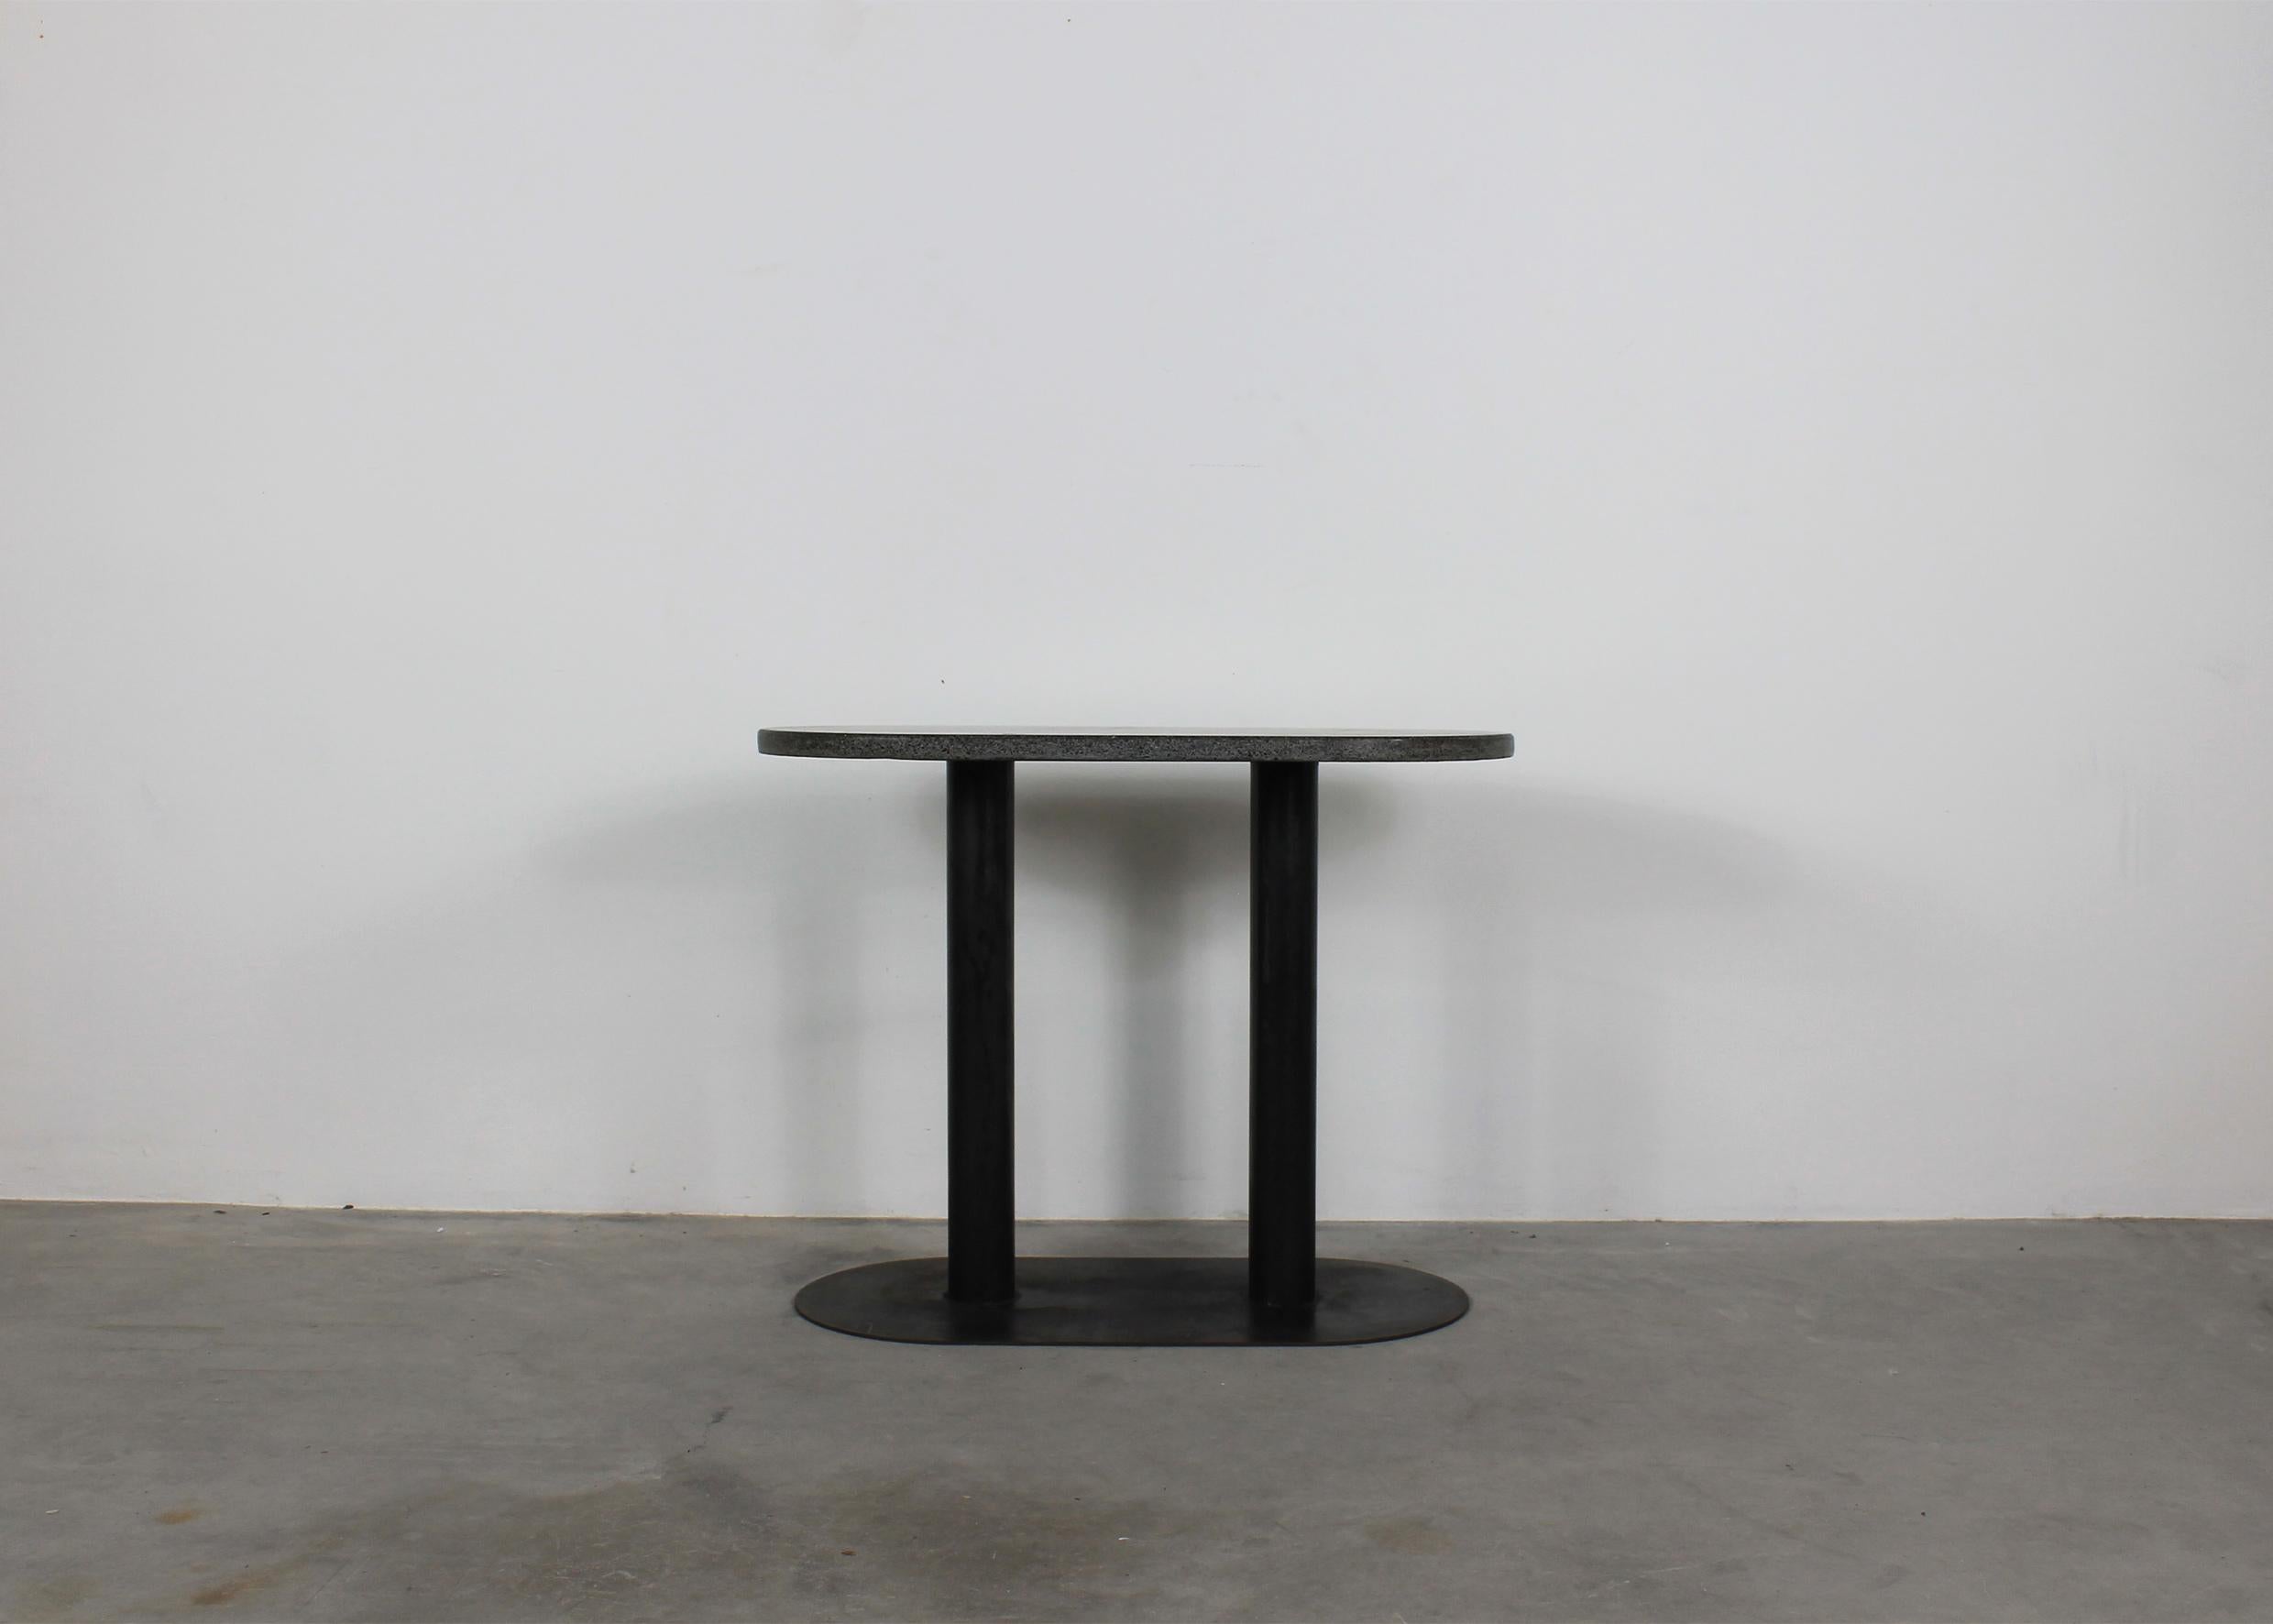 Console table with a base in black lacquered metal and an ovoidal table top in granite, originally designed by Aimaro Oreglia d'Isola and Roberto Gabetti for the residential center Talponia based in Ivrea, and manufactured by Arbo during the